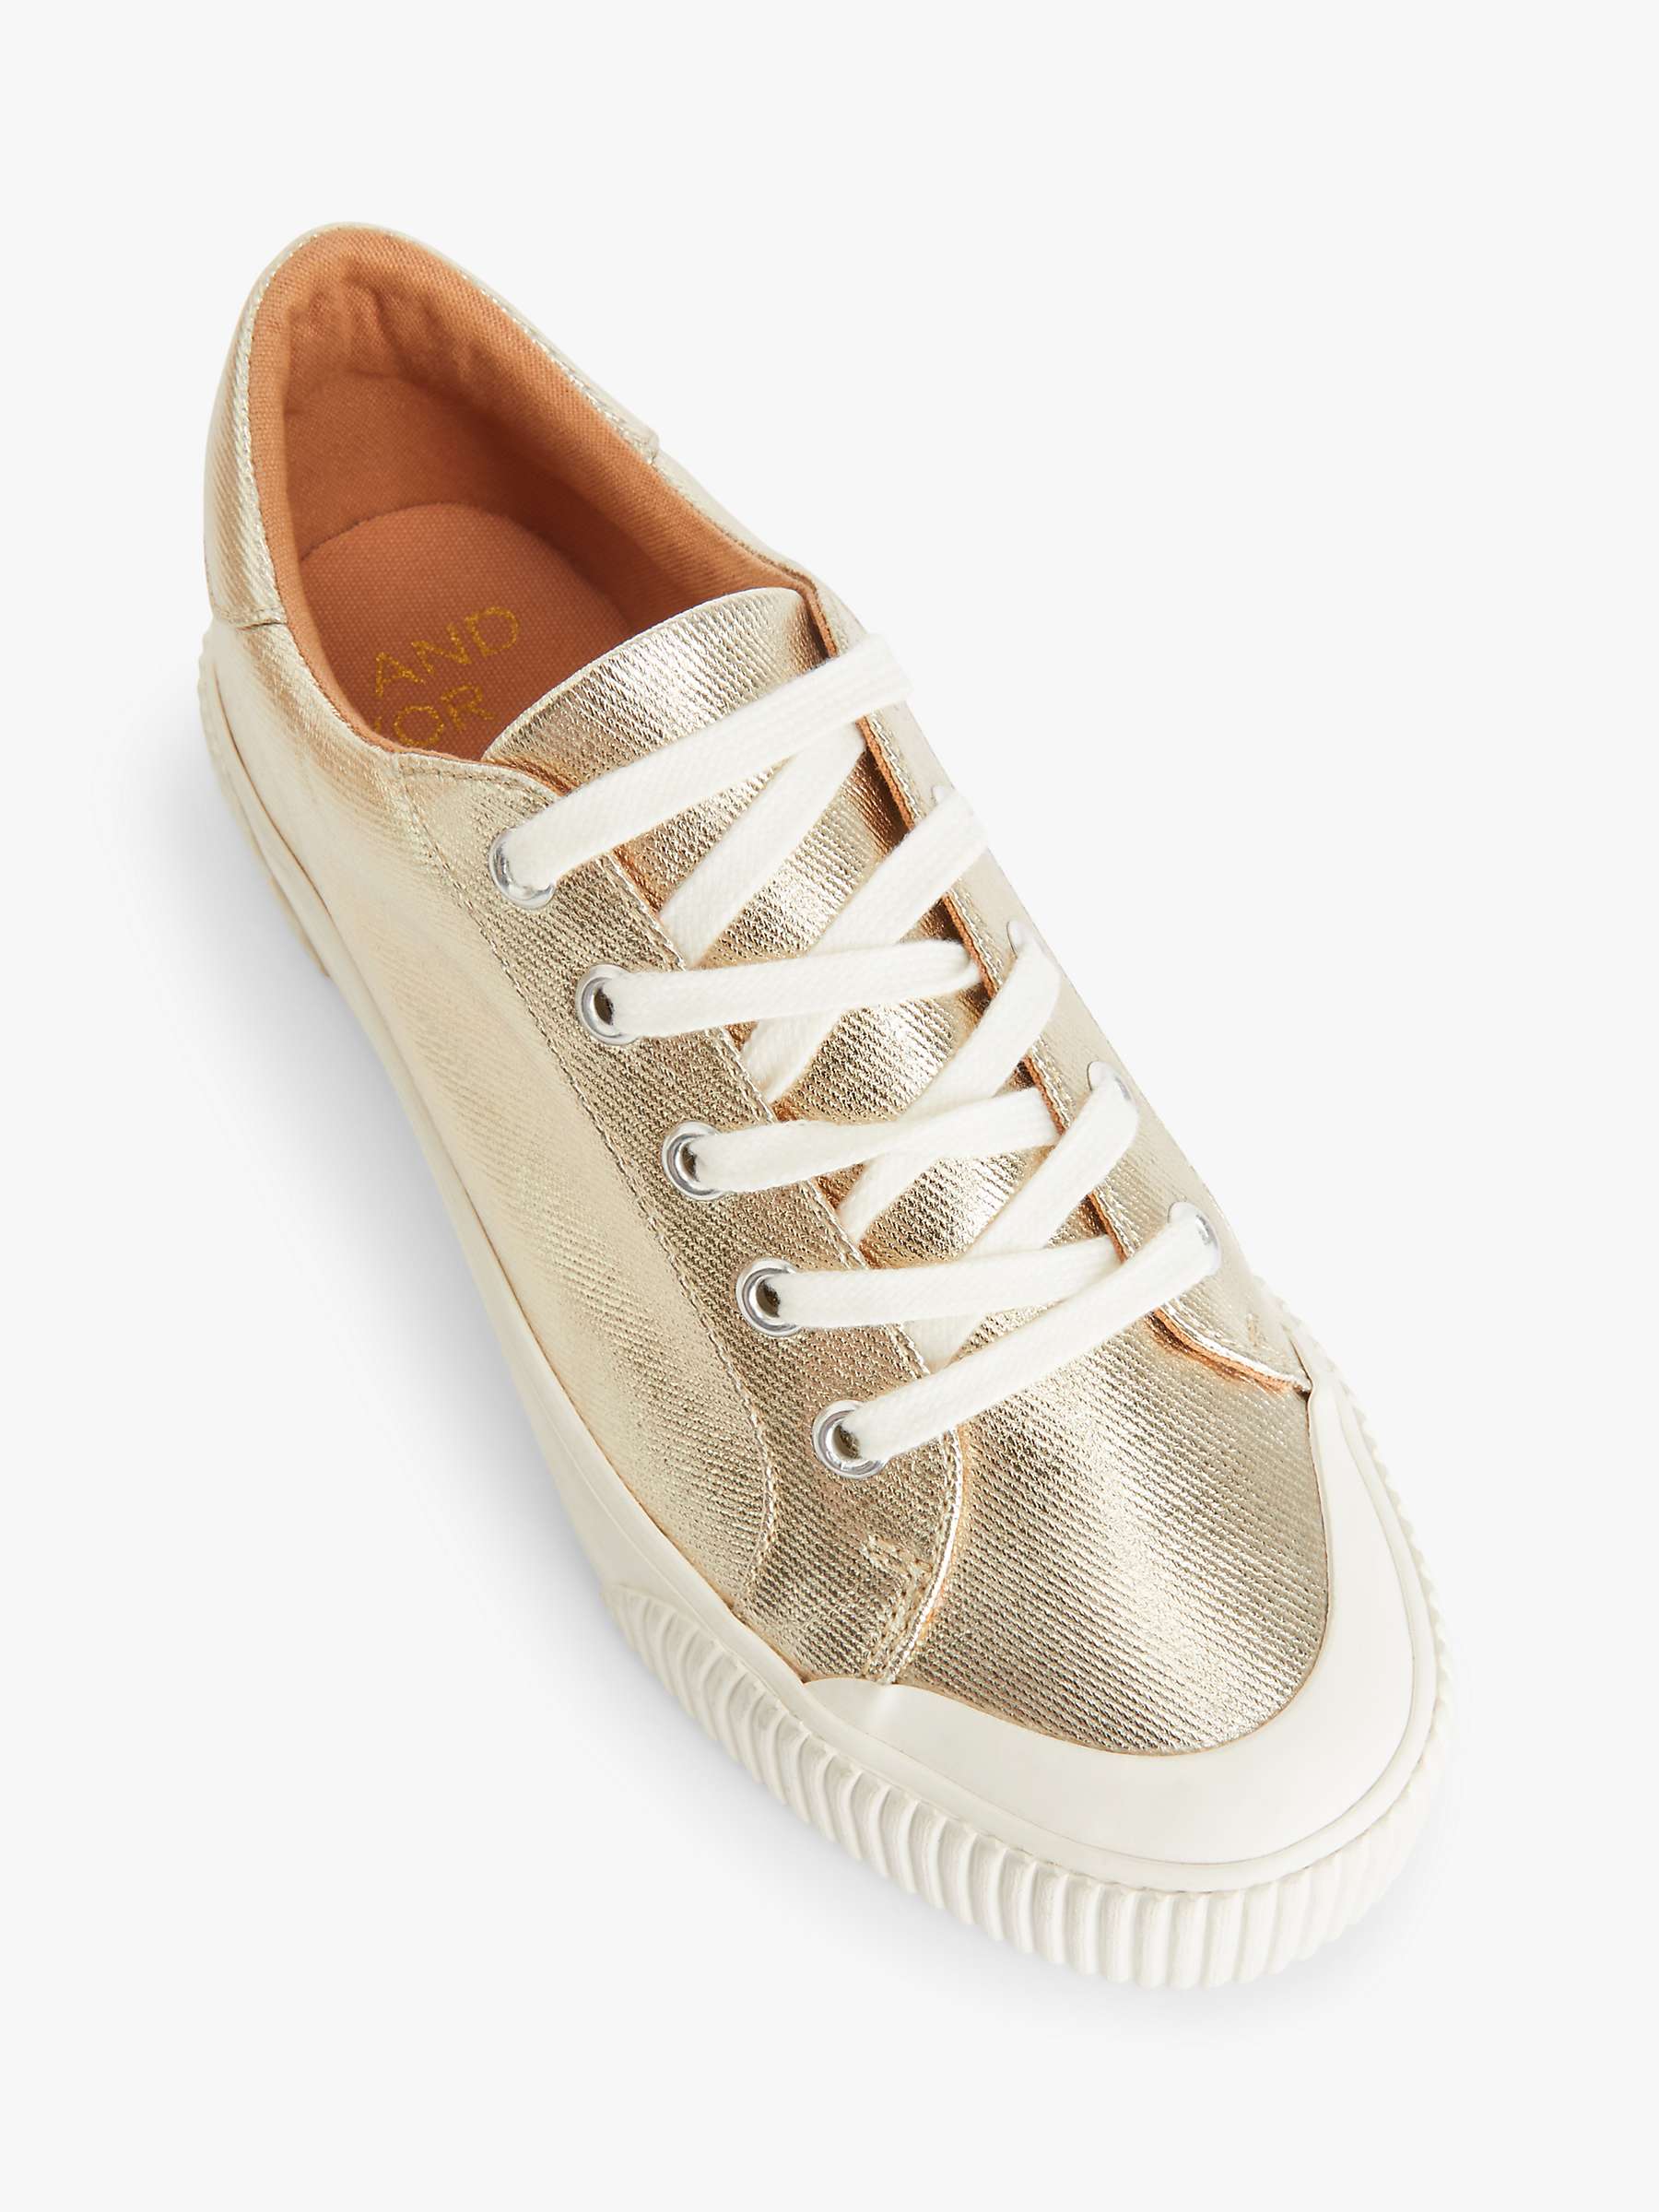 Buy AND/OR Eloisa Flatform Metallic Lace Up Trainers, Gold Online at johnlewis.com